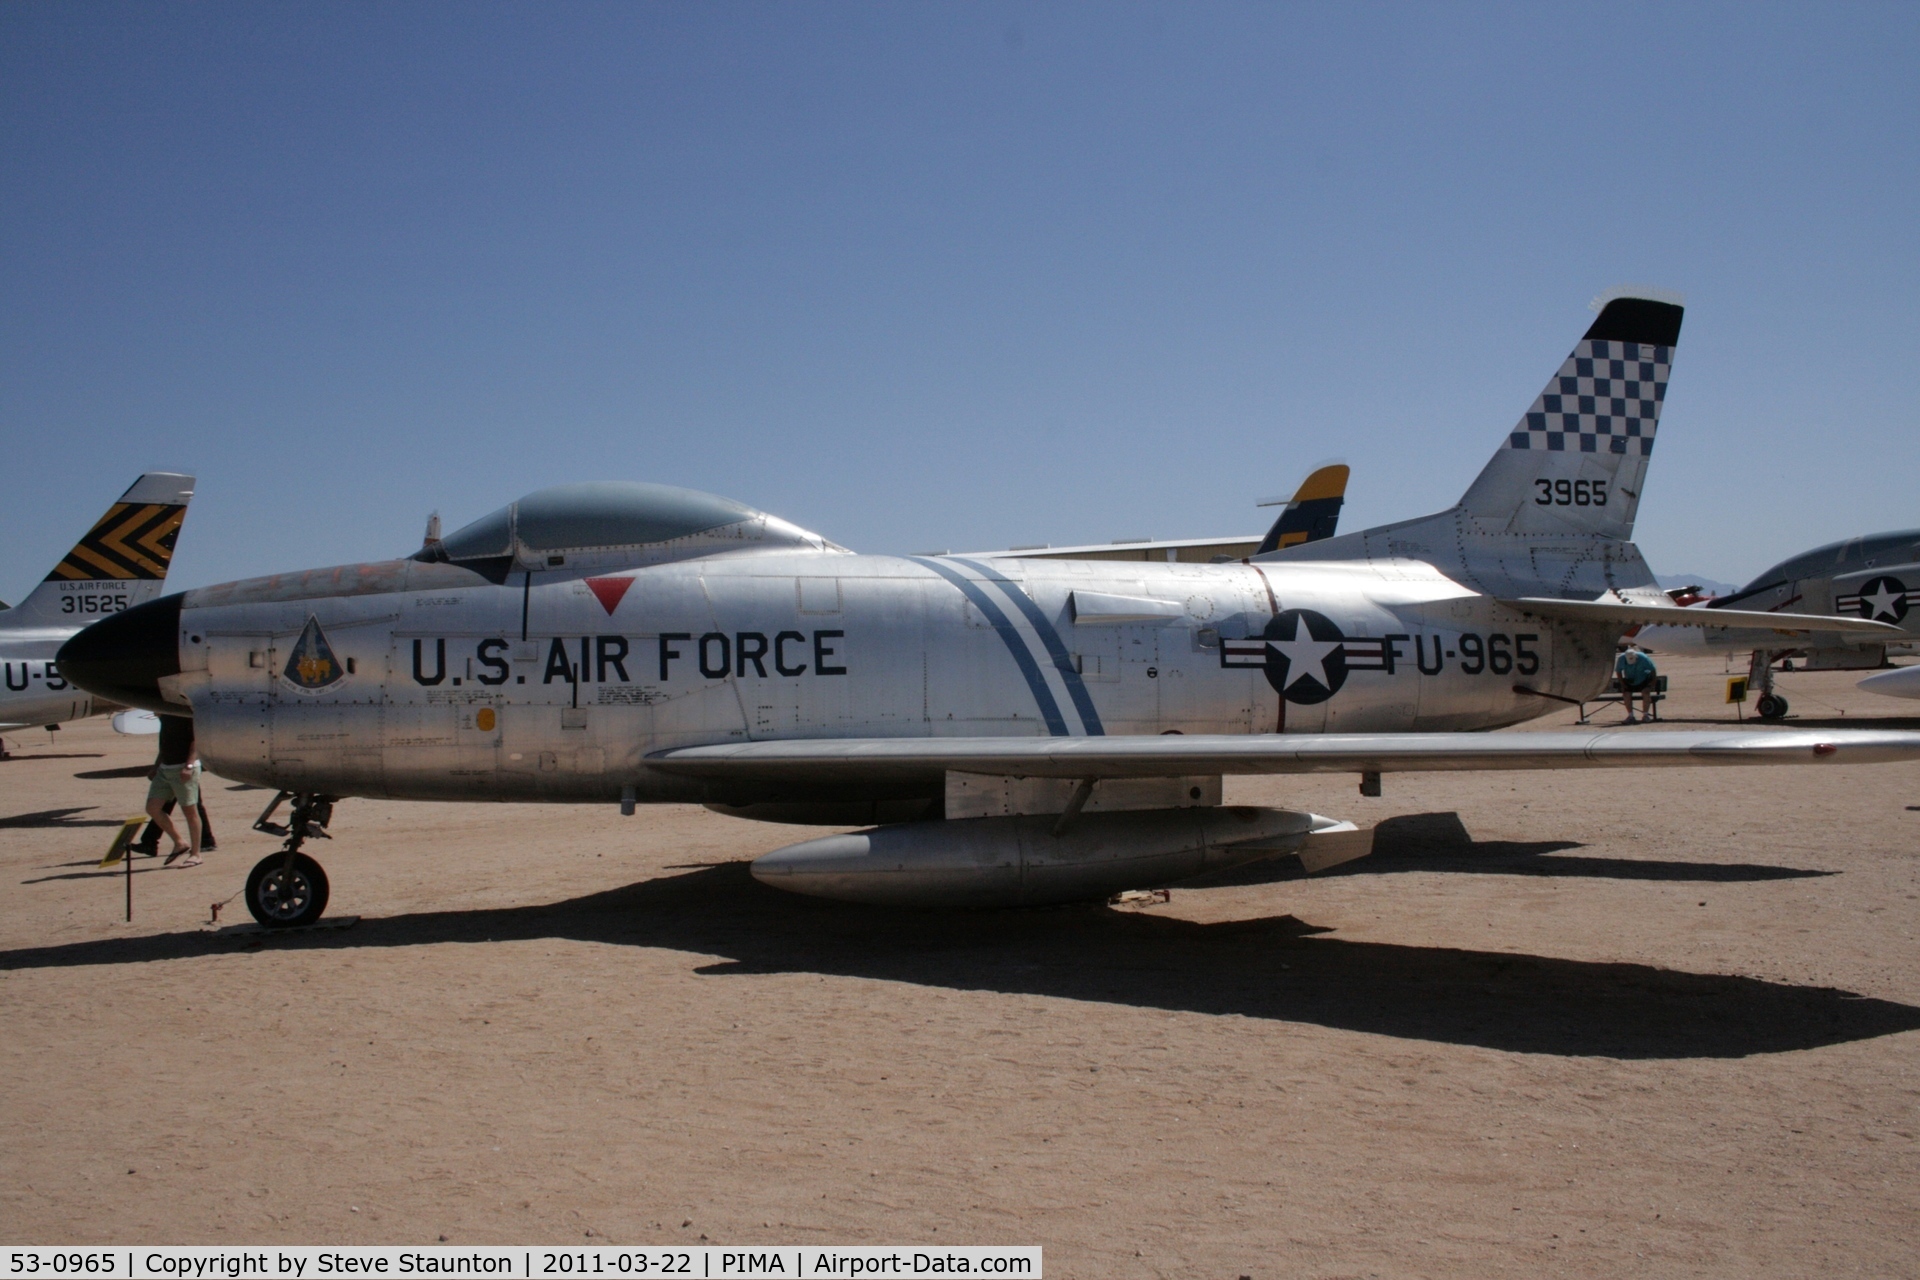 53-0965, 1953 North American F-86L Sabre C/N 201-409, Taken at Pima Air and Space Museum, in March 2011 whilst on an Aeroprint Aviation tour